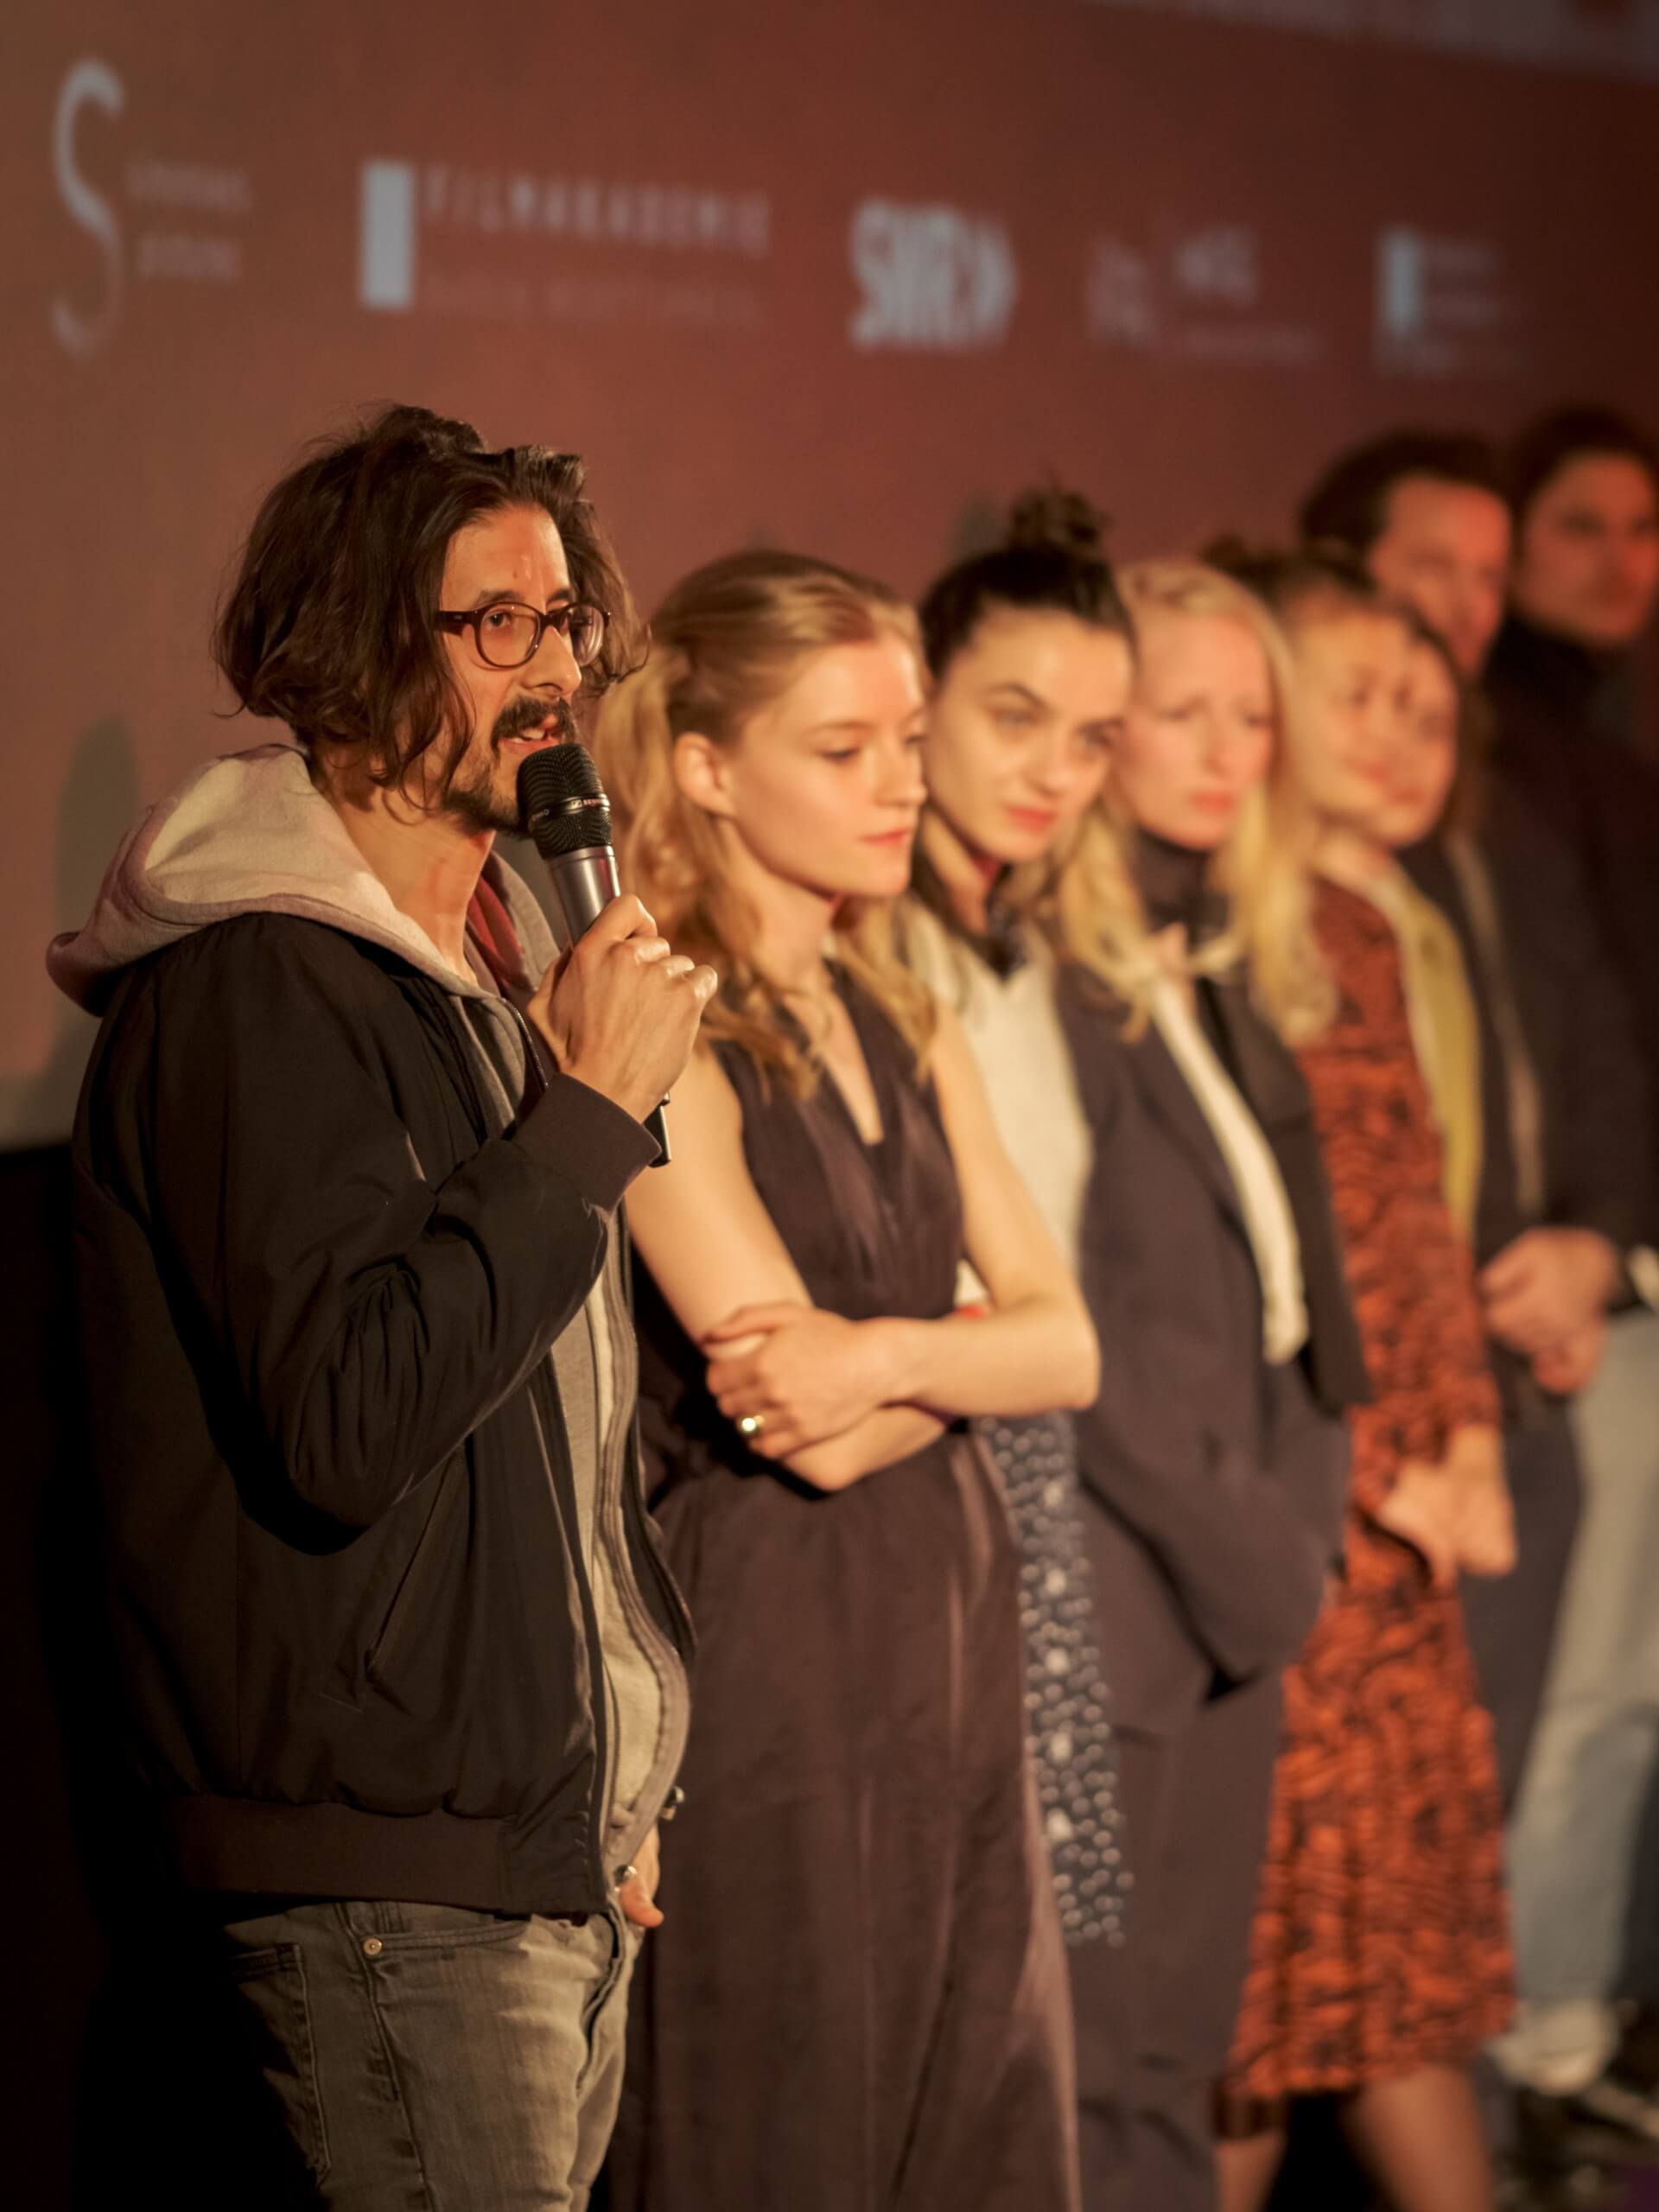 Director Oliver Kracht with team at the premiere in Berlin